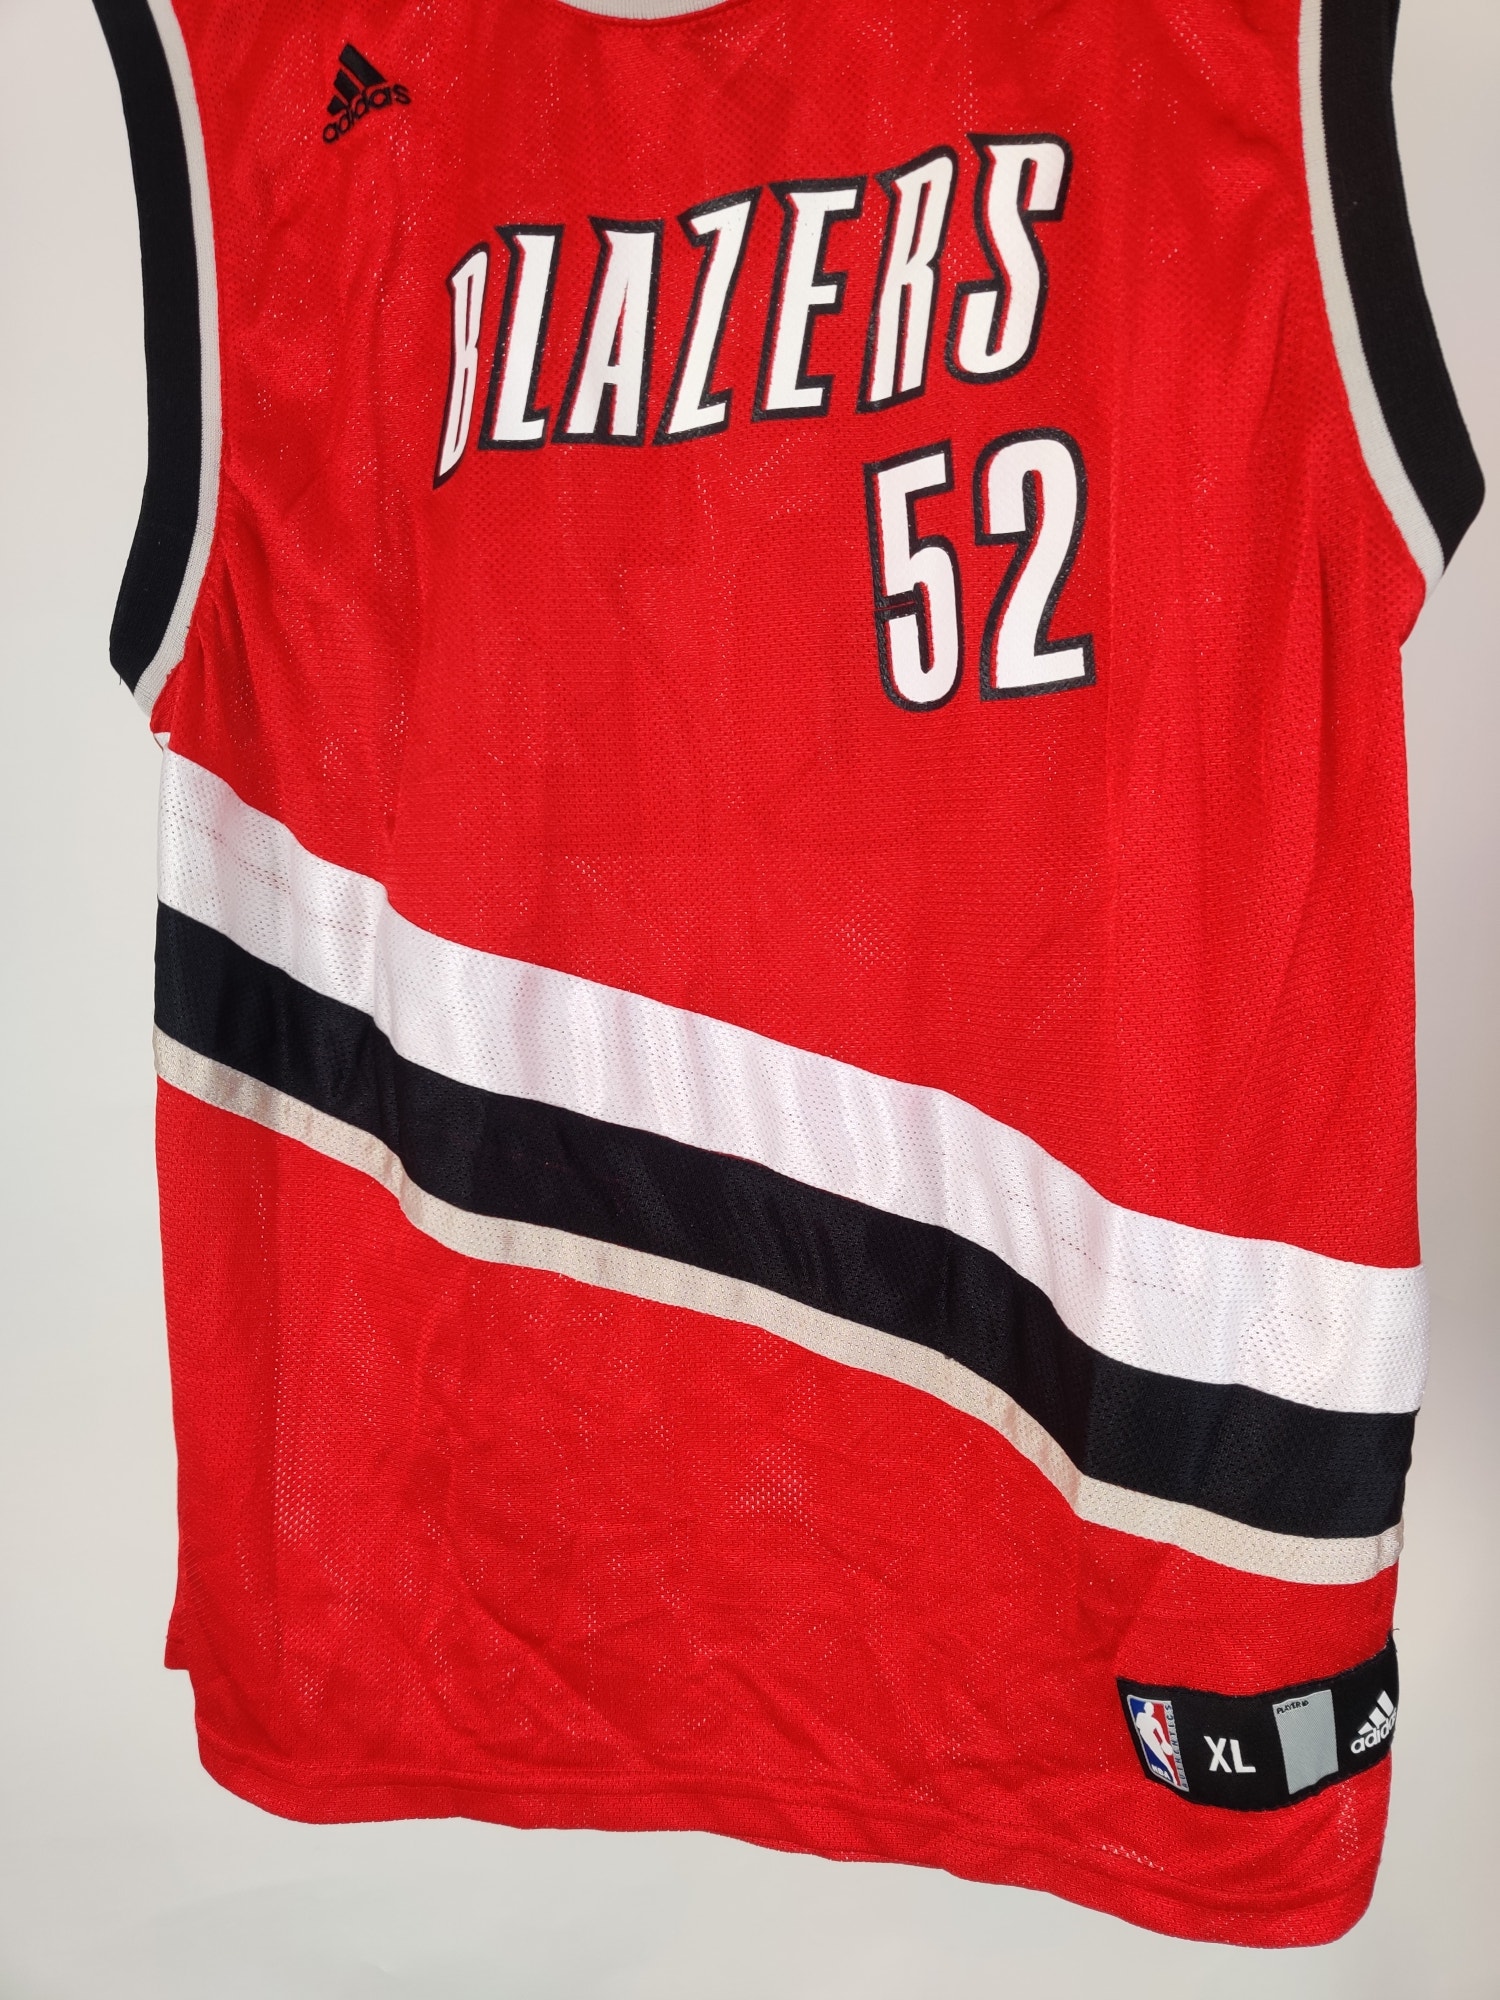 (V) Adidas NBA Portland Trail Blazers Youth jersey players Oden #52 sz XL  - Picture 7 of 11